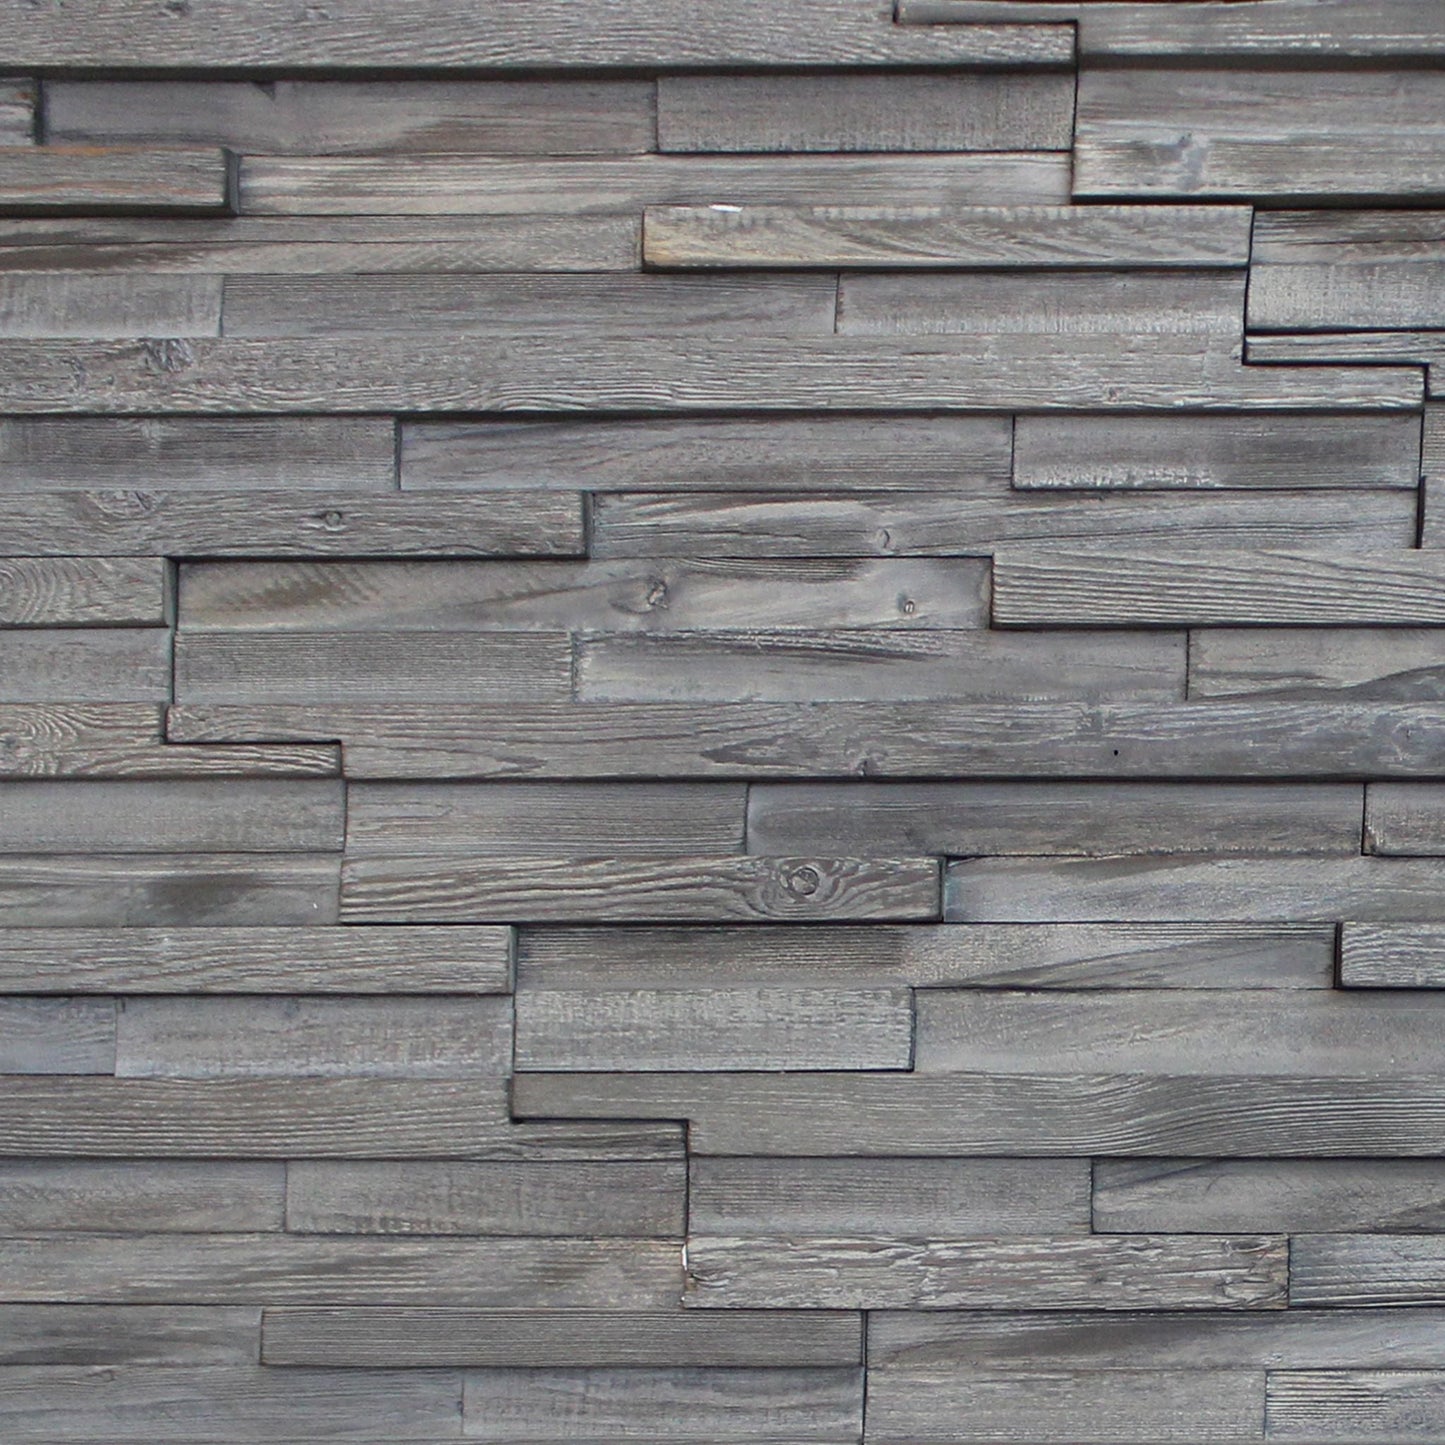 Meza 3D Wood Wall Panel - Brown/Grey/White Tones (Set of 4 or 12)